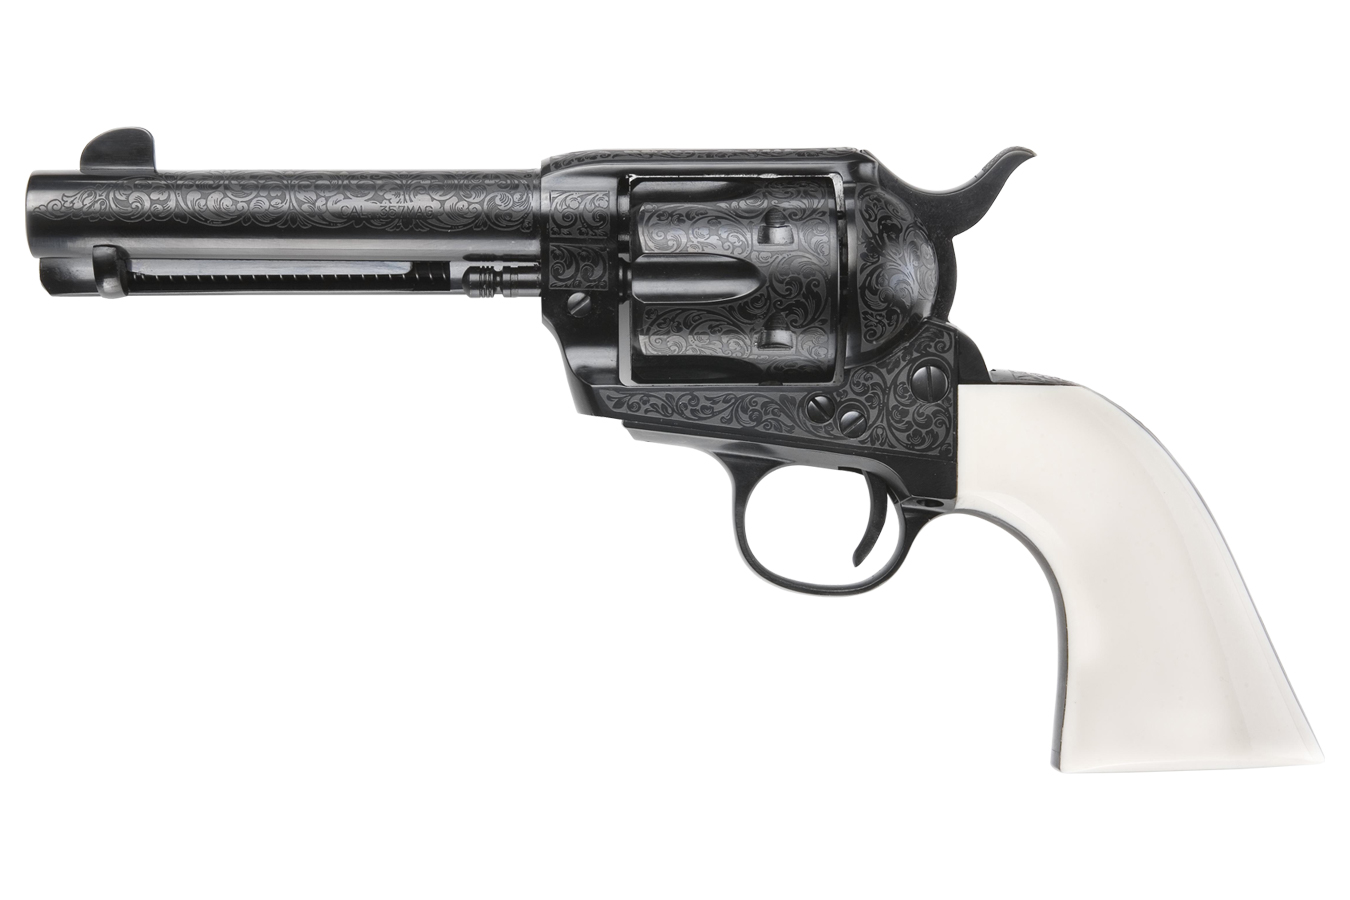 EMF CO THE SHOOTIST 45 COLT REVOLVER WITH ENHANCED ENGRAVED IVORY GRIPS